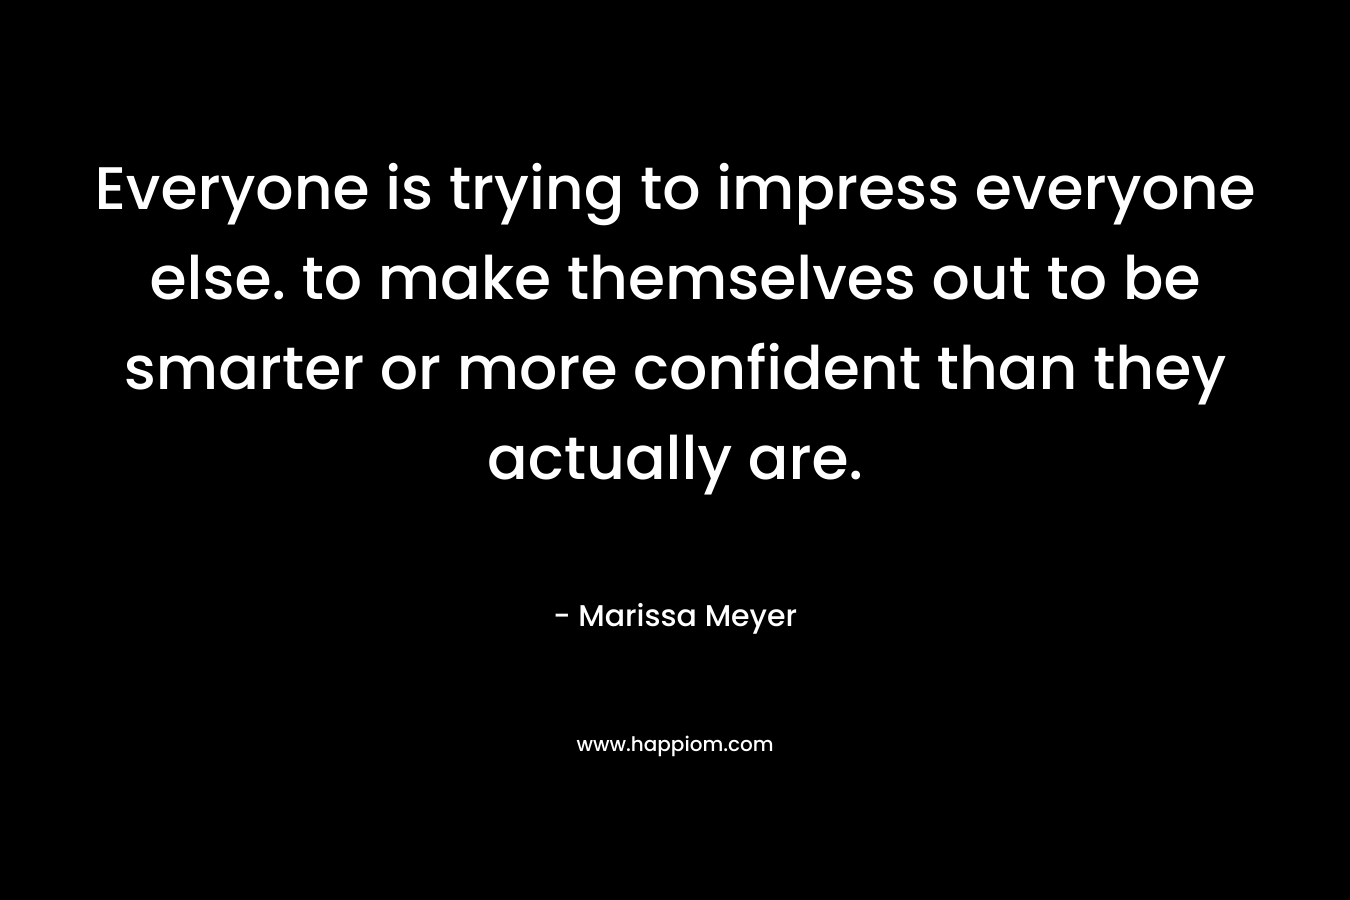 Everyone is trying to impress everyone else. to make themselves out to be smarter or more confident than they actually are.